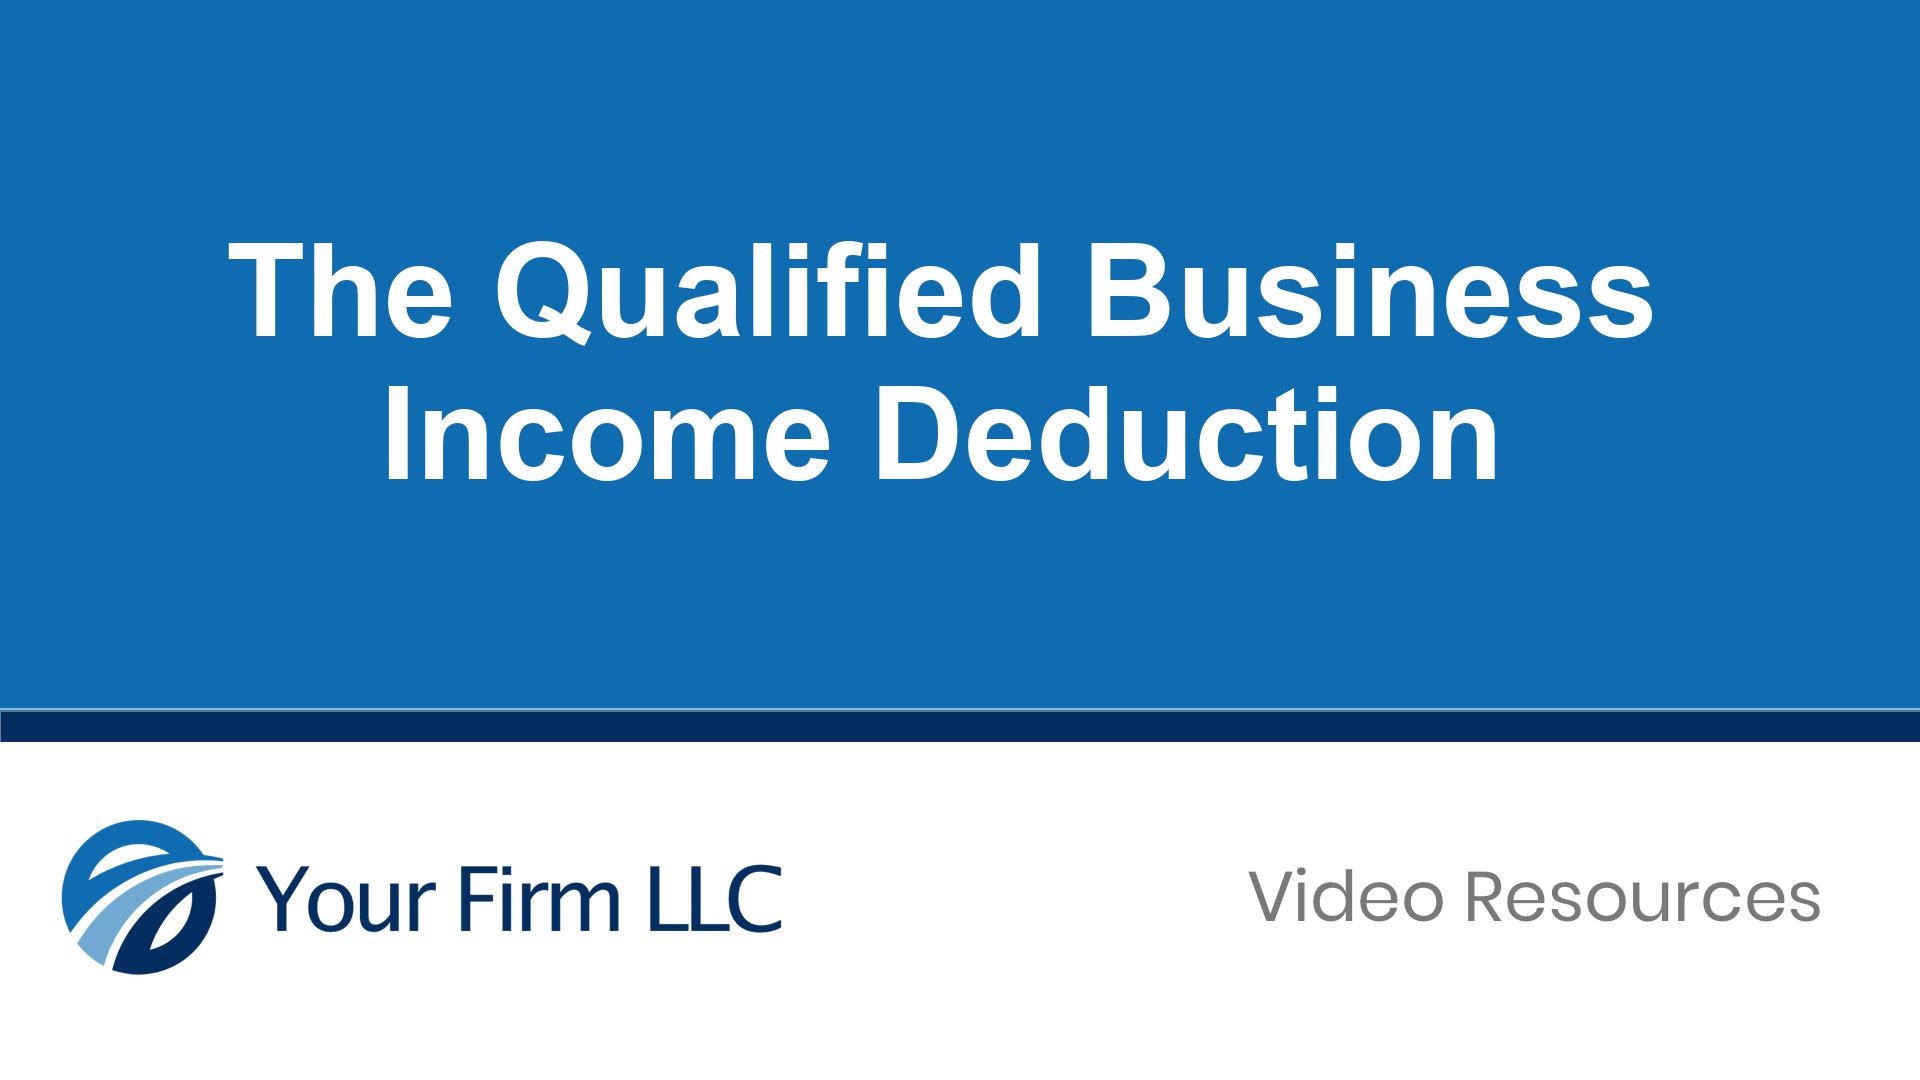 The Qualified Business Income Deduction